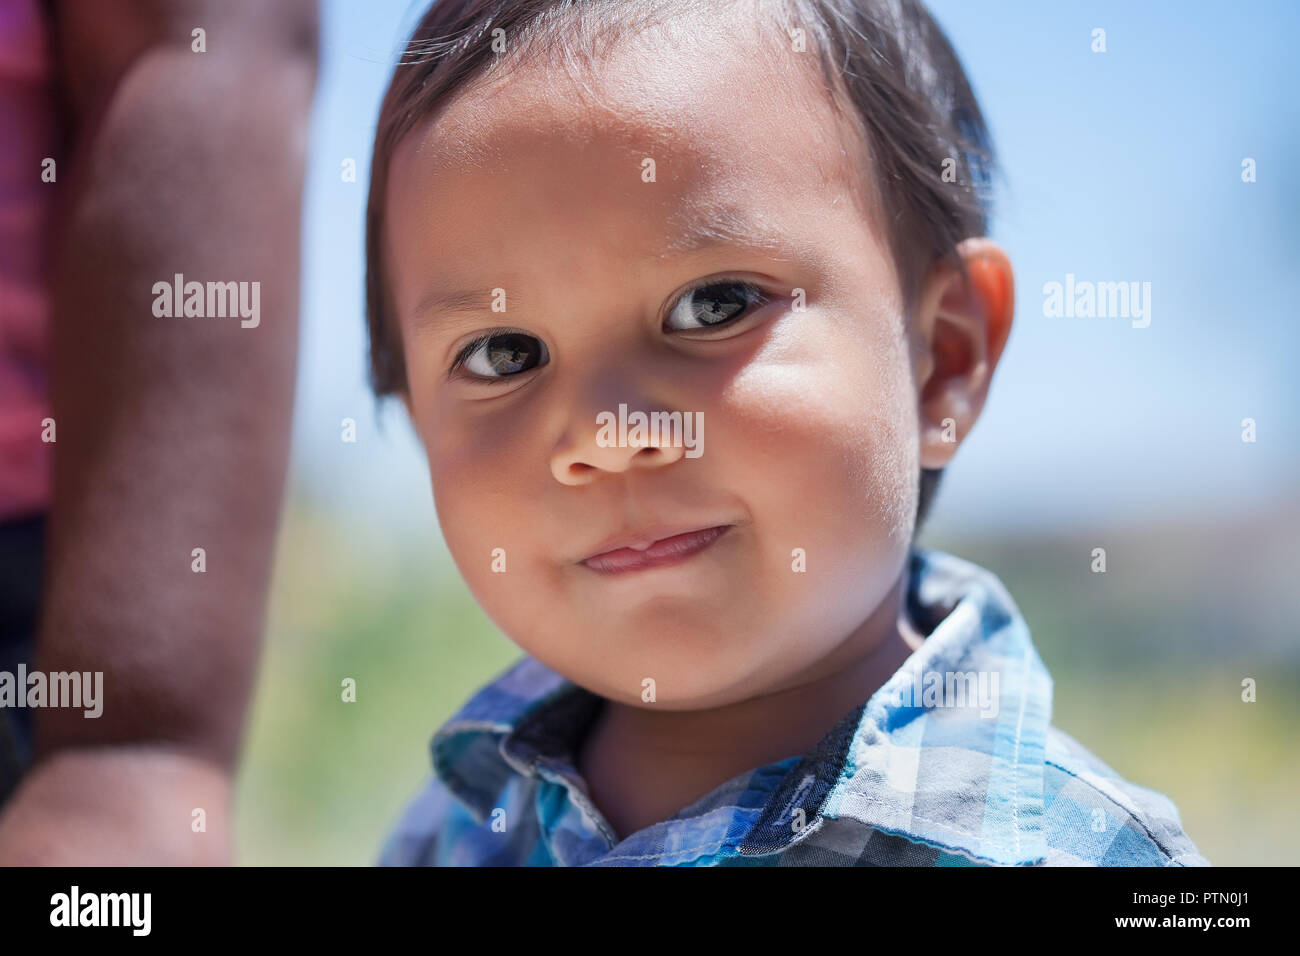 Smart 2 year old boy with bright eyes and cute smile looking innocent and standing next to sister in an outdoor park during summer Stock Photo